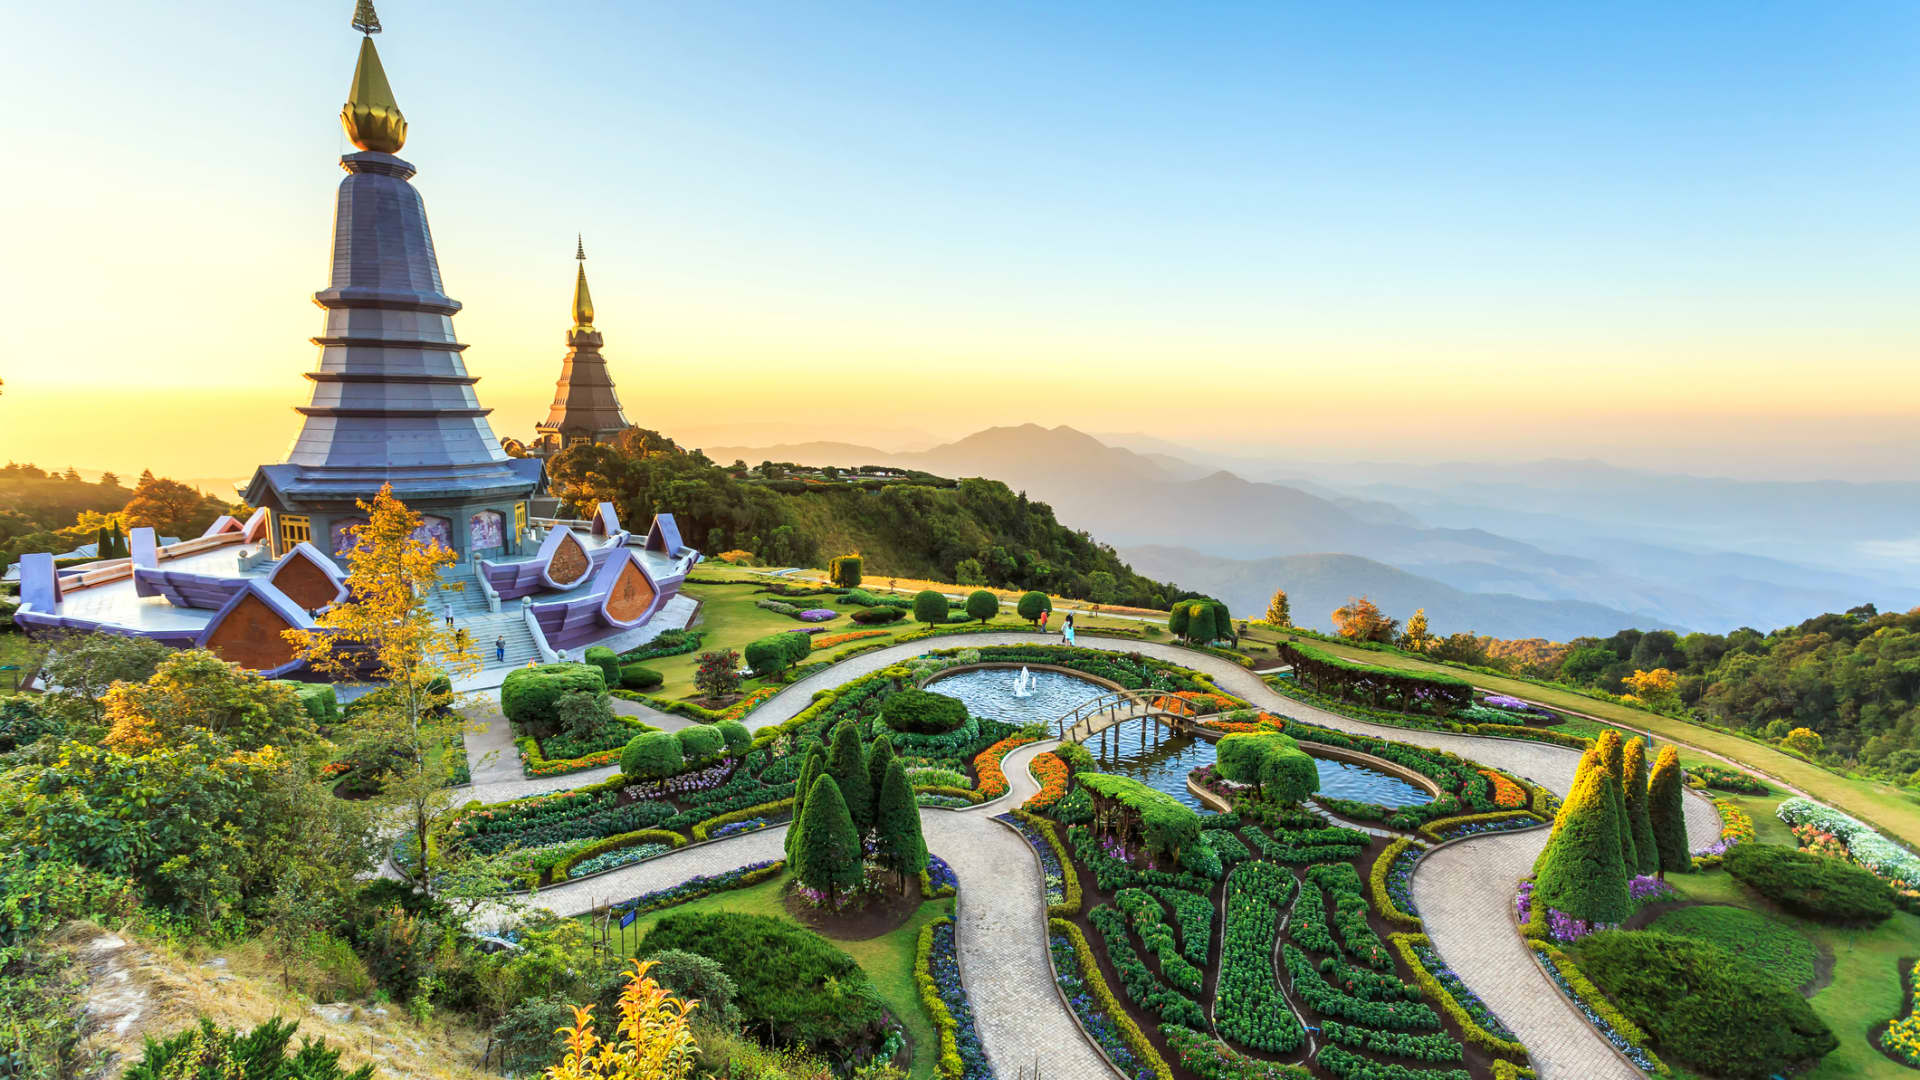 Chiang Mai, Thailand is one of the cities in Asia that was listed in International Living's report.